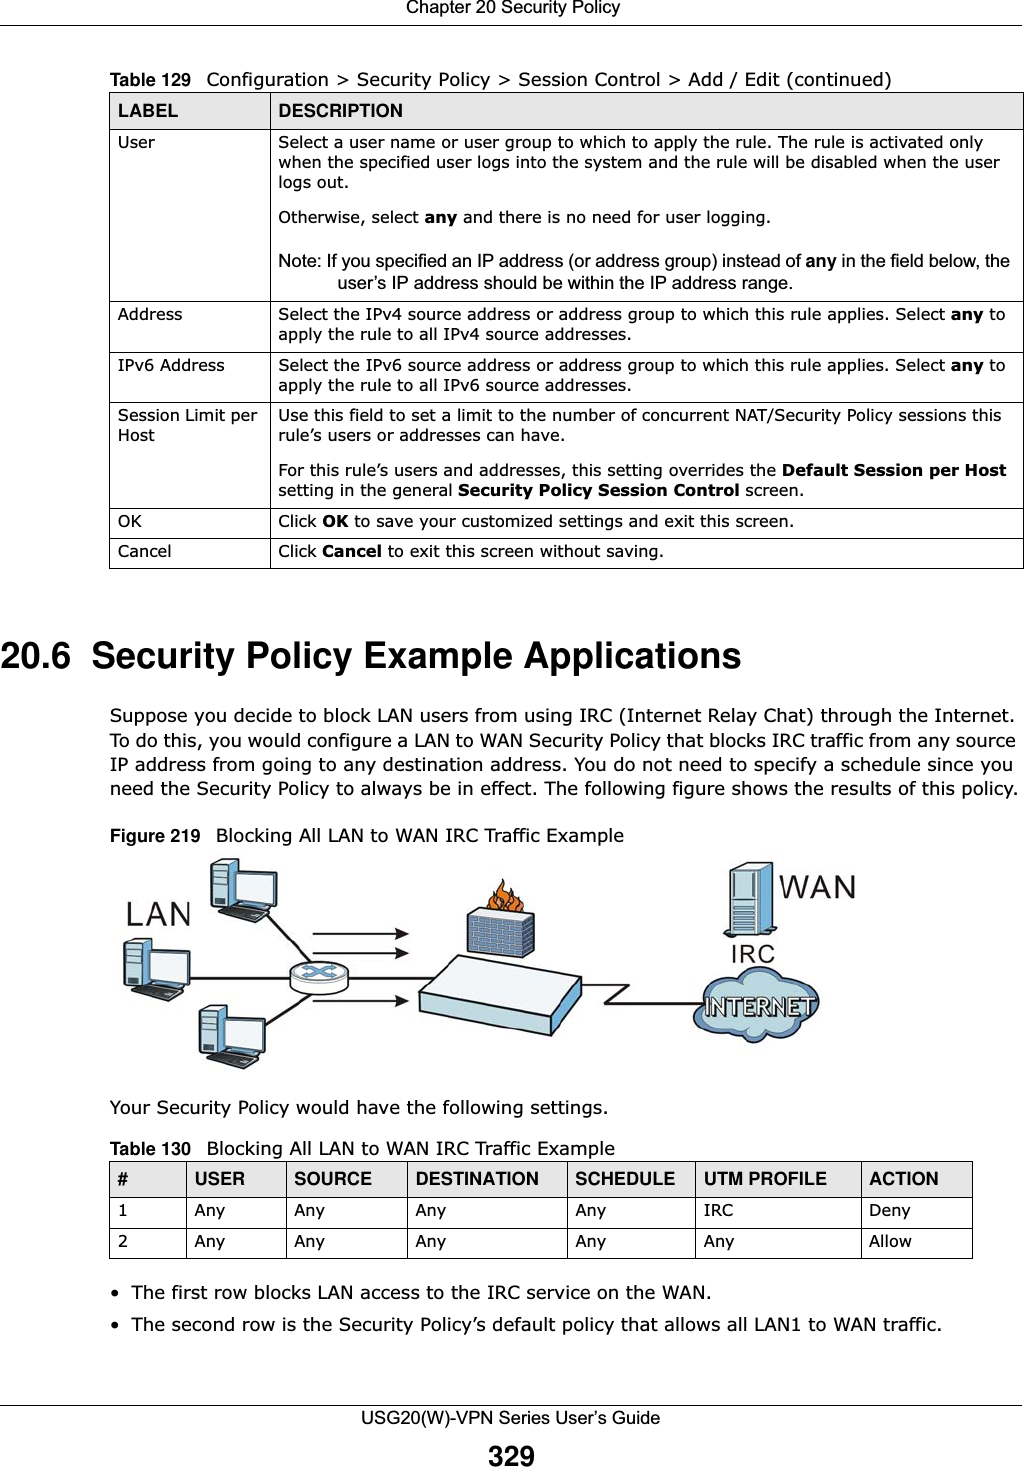  Chapter 20 Security PolicyUSG20(W)-VPN Series User’s Guide32920.6  Security Policy Example ApplicationsSuppose you decide to block LAN users from using IRC (Internet Relay Chat) through the Internet. To do this, you would configure a LAN to WAN Security Policy that blocks IRC traffic from any source IP address from going to any destination address. You do not need to specify a schedule since you need the Security Policy to always be in effect. The following figure shows the results of this policy.Figure 219   Blocking All LAN to WAN IRC Traffic Example Your Security Policy would have the following settings. • The first row blocks LAN access to the IRC service on the WAN. • The second row is the Security Policy’s default policy that allows all LAN1 to WAN traffic.User Select a user name or user group to which to apply the rule. The rule is activated only when the specified user logs into the system and the rule will be disabled when the user logs out.Otherwise, select any and there is no need for user logging.Note: If you specified an IP address (or address group) instead of any in the field below, the user’s IP address should be within the IP address range.Address Select the IPv4 source address or address group to which this rule applies. Select any to apply the rule to all IPv4 source addresses.IPv6 Address Select the IPv6 source address or address group to which this rule applies. Select any to apply the rule to all IPv6 source addresses.Session Limit per HostUse this field to set a limit to the number of concurrent NAT/Security Policy sessions this rule’s users or addresses can have.For this rule’s users and addresses, this setting overrides the Default Session per Host setting in the general Security Policy Session Control screen.OK Click OK to save your customized settings and exit this screen.Cancel Click Cancel to exit this screen without saving.Table 129   Configuration &gt; Security Policy &gt; Session Control &gt; Add / Edit (continued)LABEL DESCRIPTIONTable 130   Blocking All LAN to WAN IRC Traffic Example #USER SOURCE DESTINATION SCHEDULE UTM PROFILE ACTION1 Any Any Any Any IRC Deny2 Any Any Any Any Any Allow